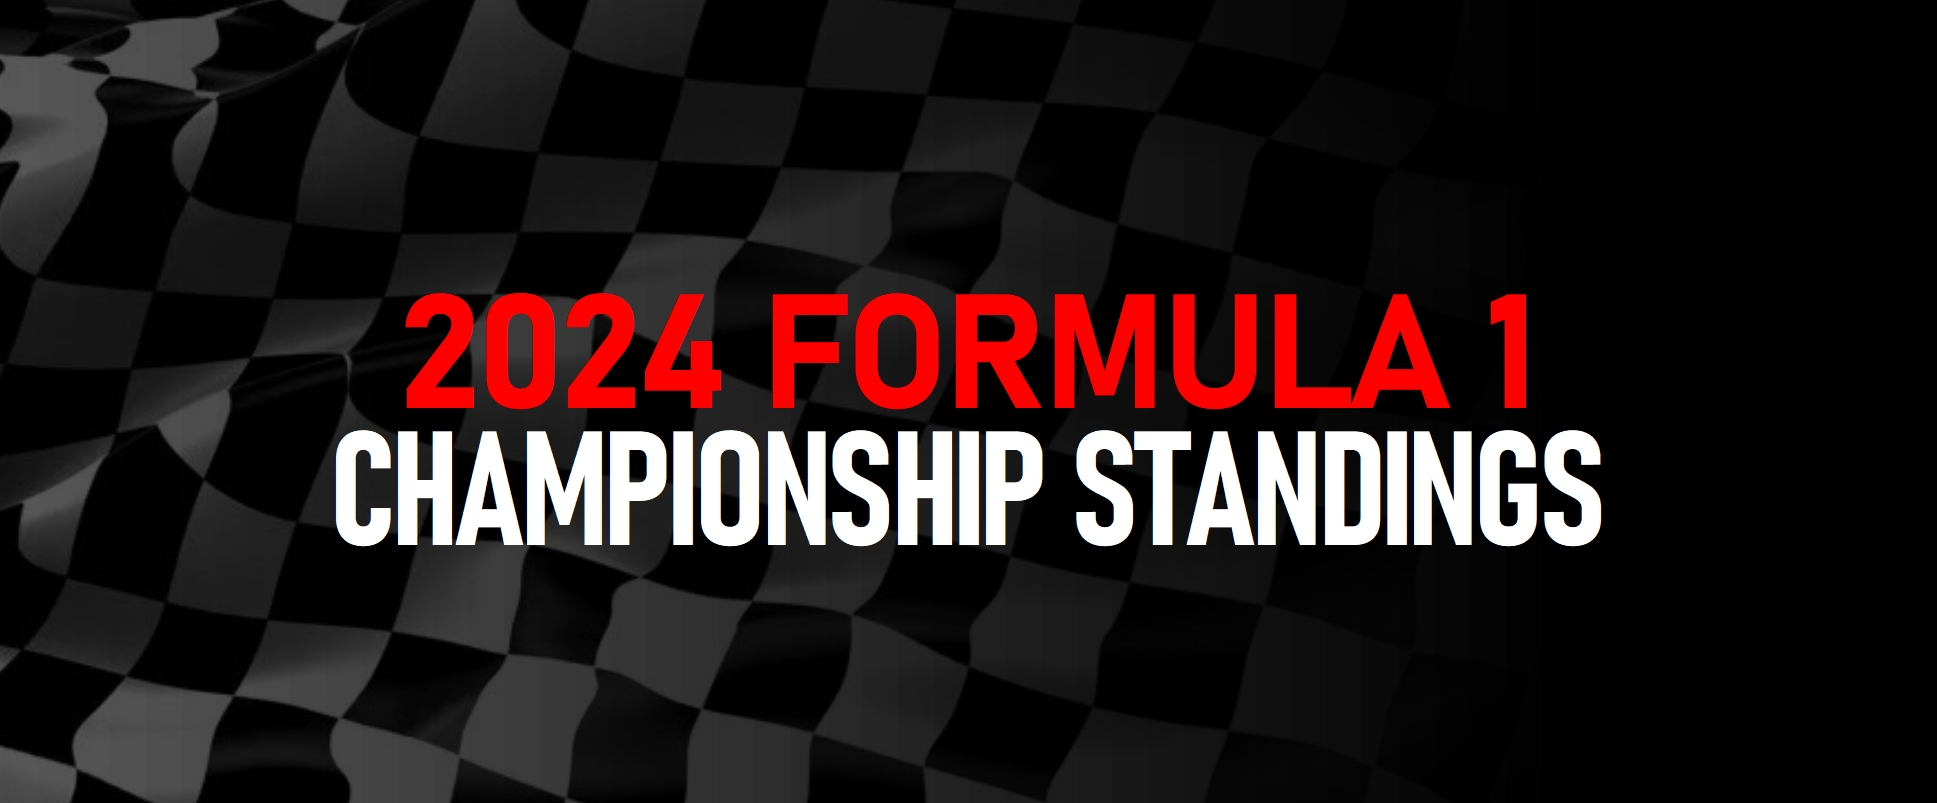 2024 F1 Championship Standings Lights Out